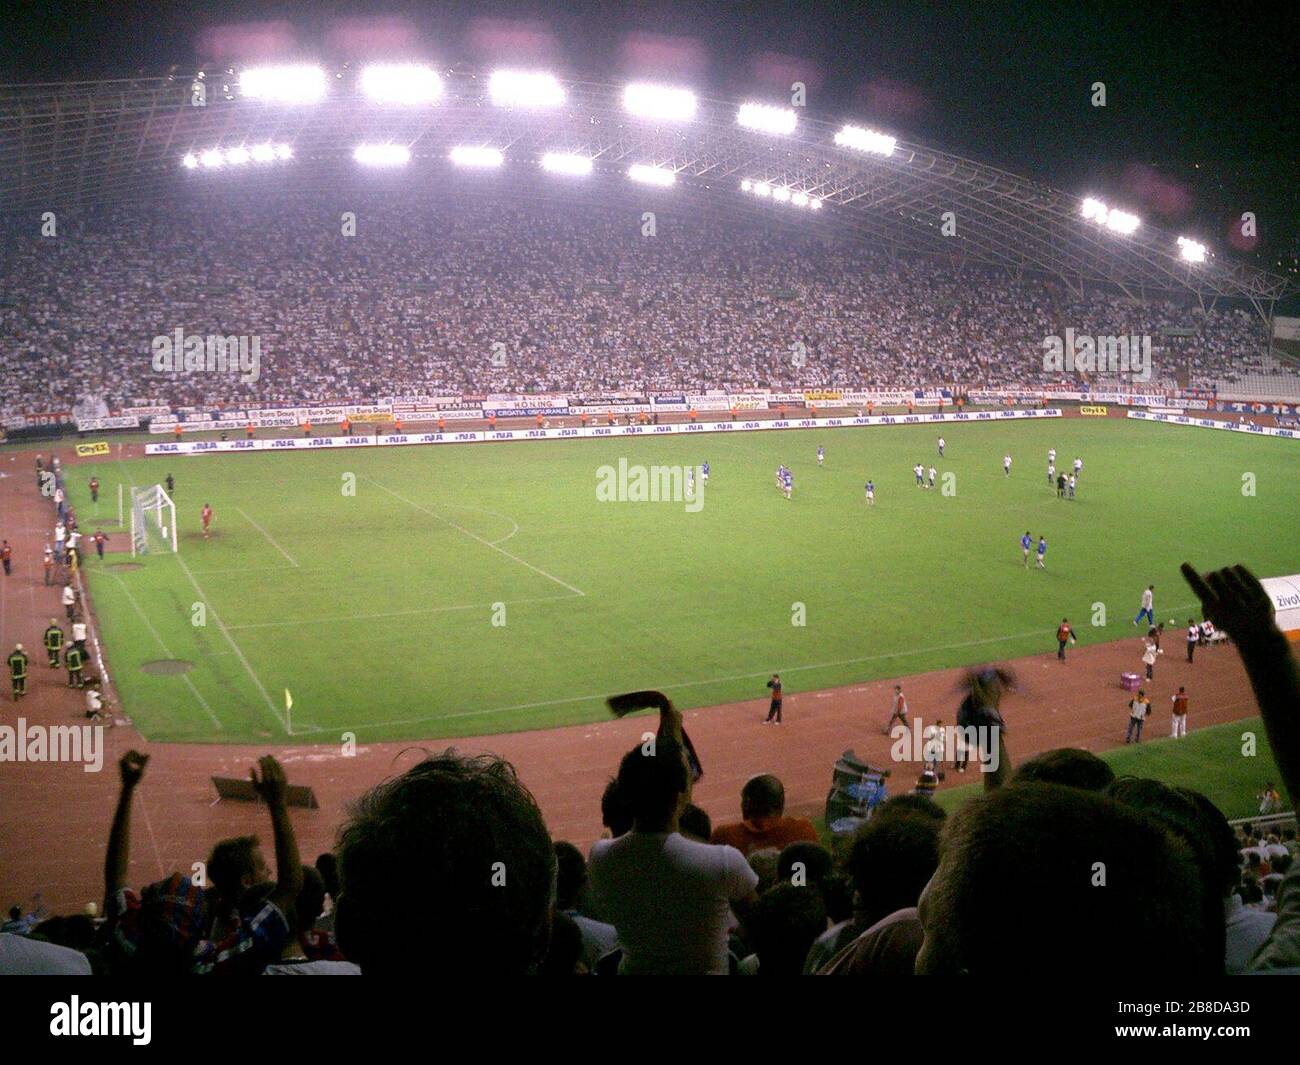 'An image showing inside of Poljud Beauty two minutes before beginning of the second half of the biggest Croatian football derby between Hajduk Split and Dinamo Zagreb.; 1 October 2006; Own work; West Brom 4ever; ' Stock Photo